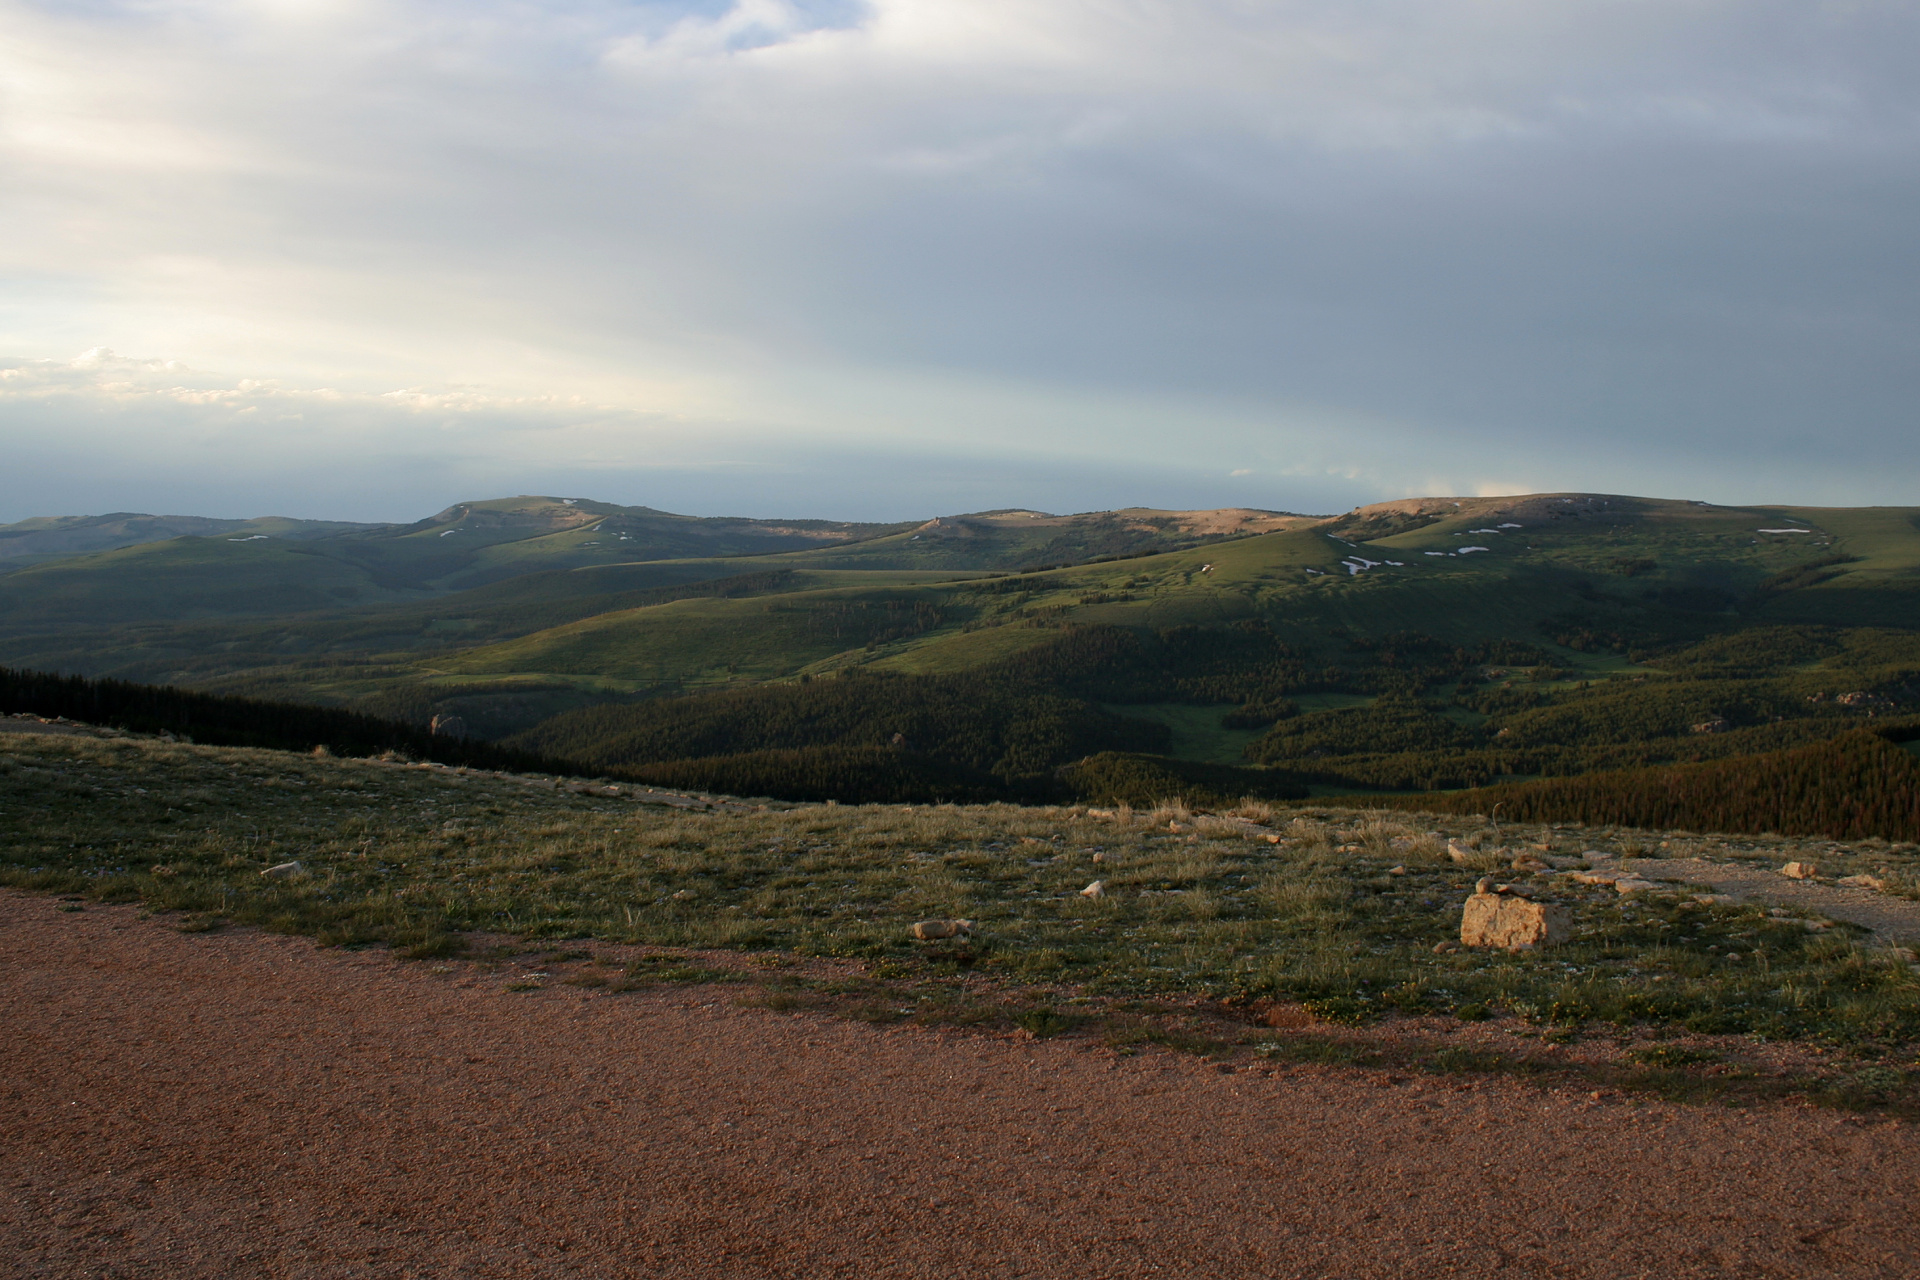 Looking North from the Medicine Wheel (Travels » US Trip 2: Cheyenne Epic » The Country » Bighorn Mountains)